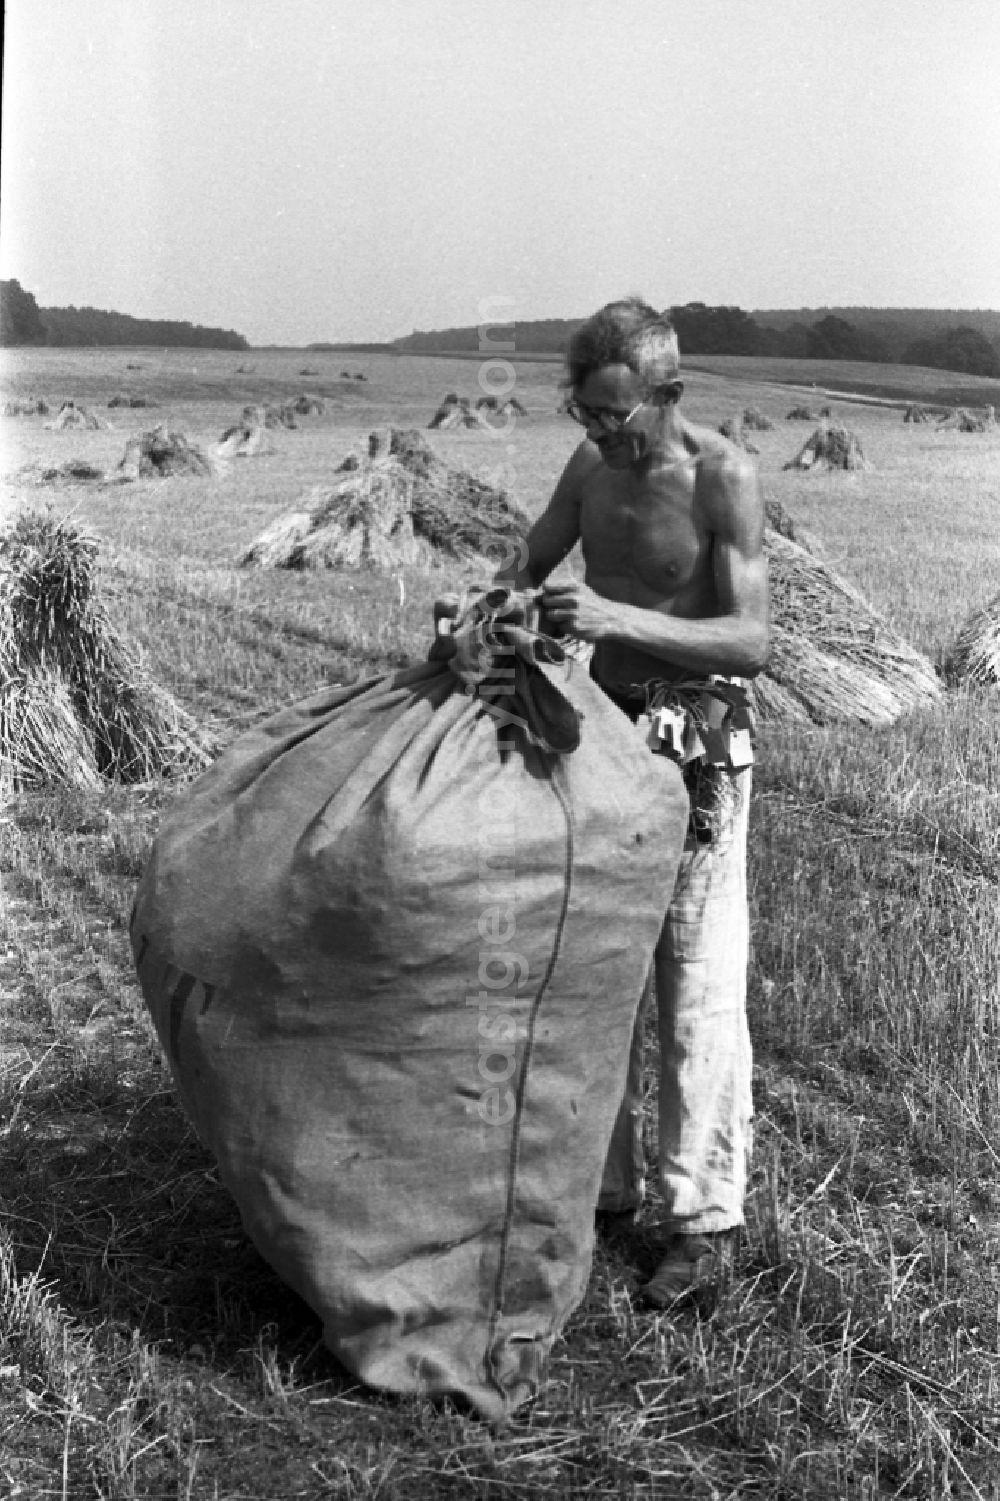 GDR photo archive: Trossin - Farmers pack on a field straw and grain into bags in Trossin in Germany